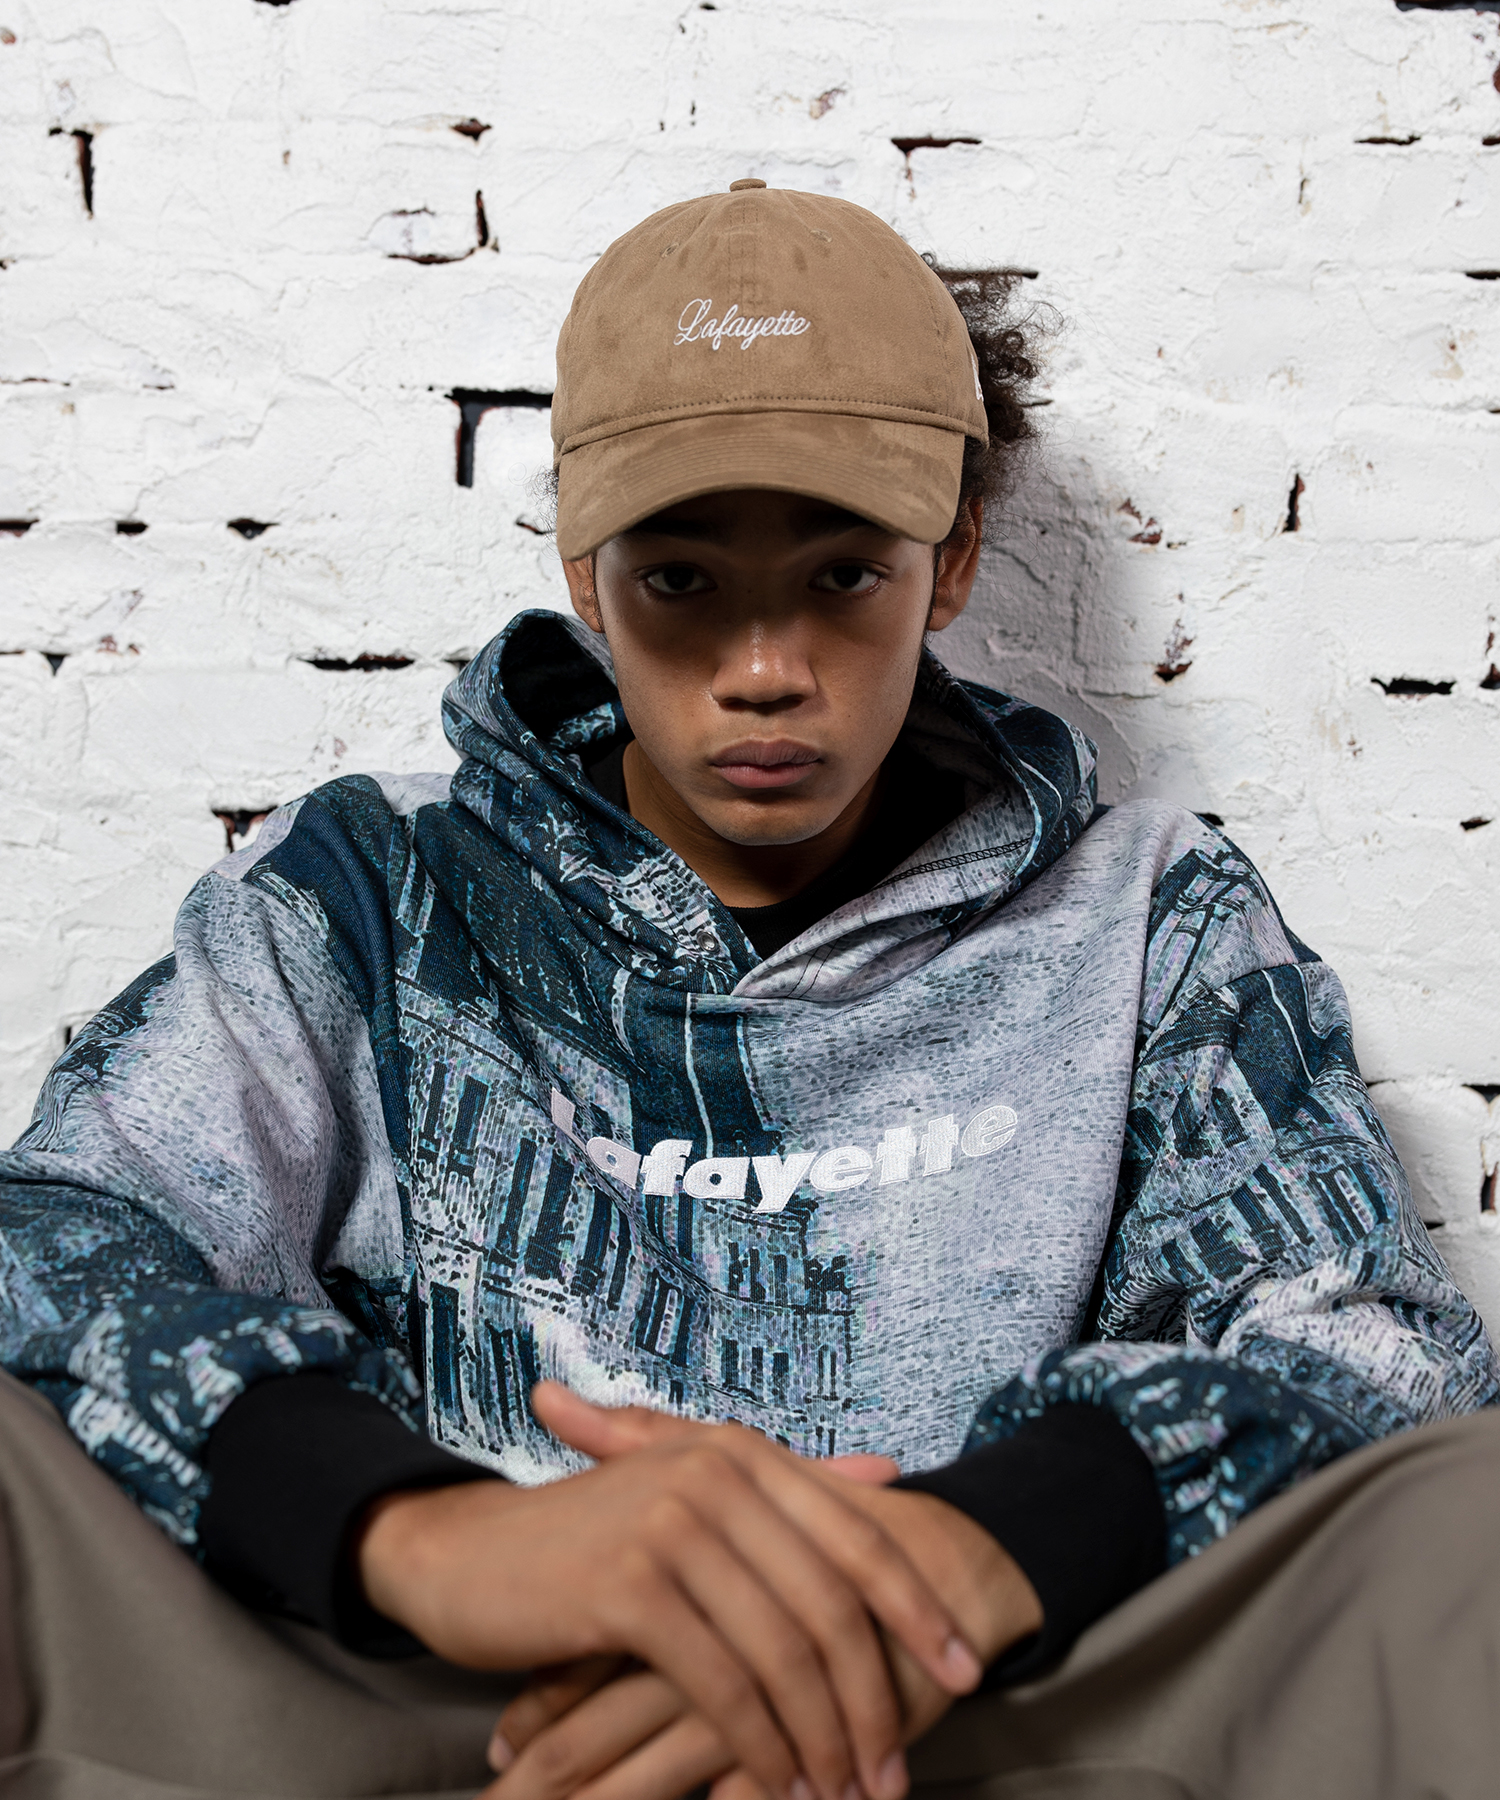 LFYT 2020 Autumn/Winter Collection 12th Delivery – ラファイエット ...